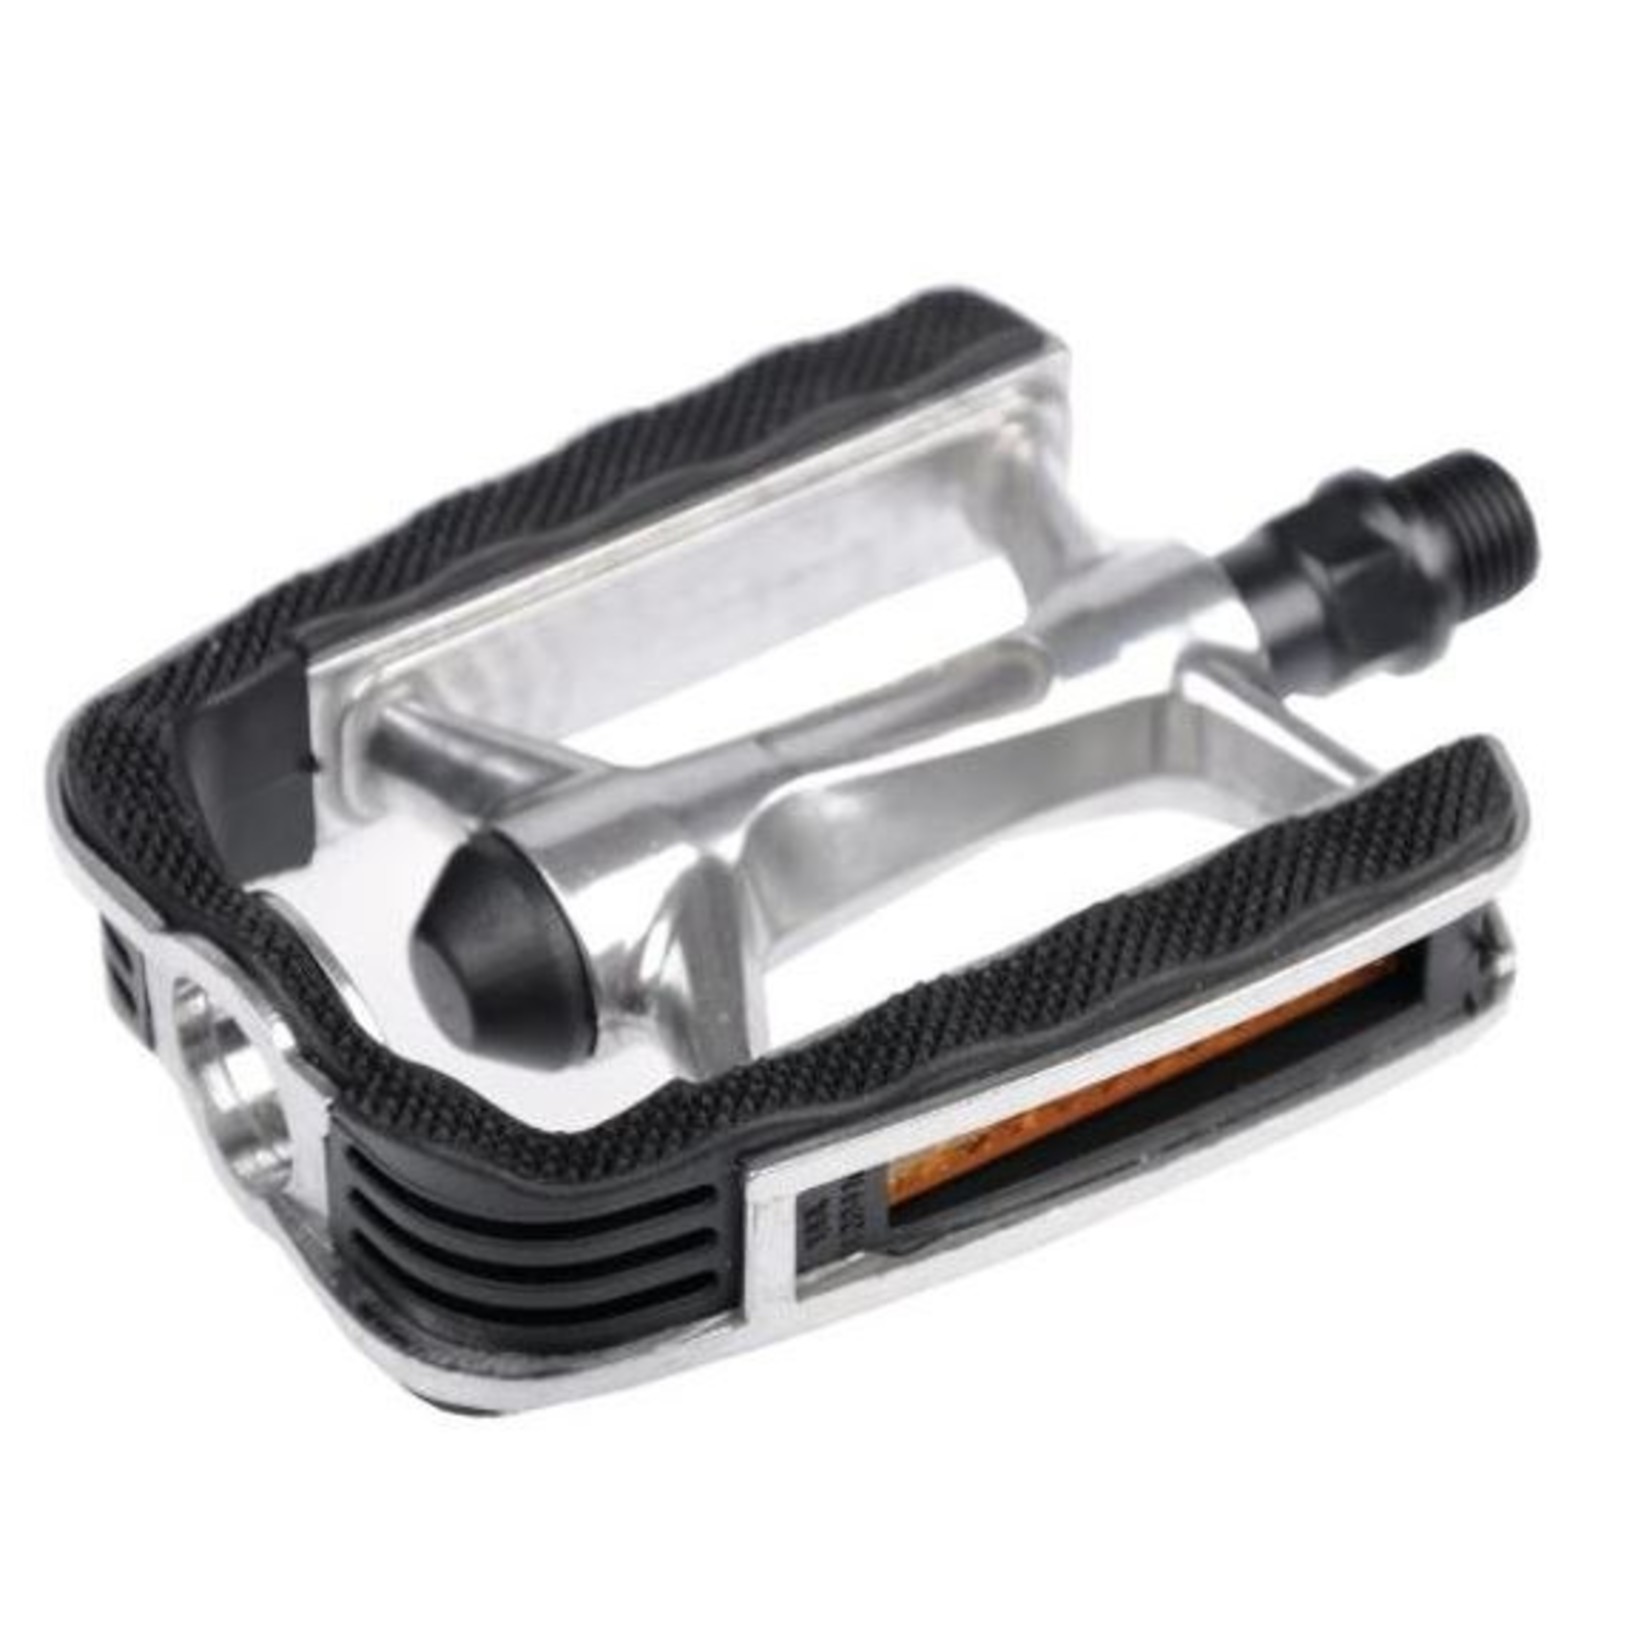 QBP QBP Bicycle Pedal Alloy Trekking With Kraton Top - 9/16 - DU Bearing - Silver